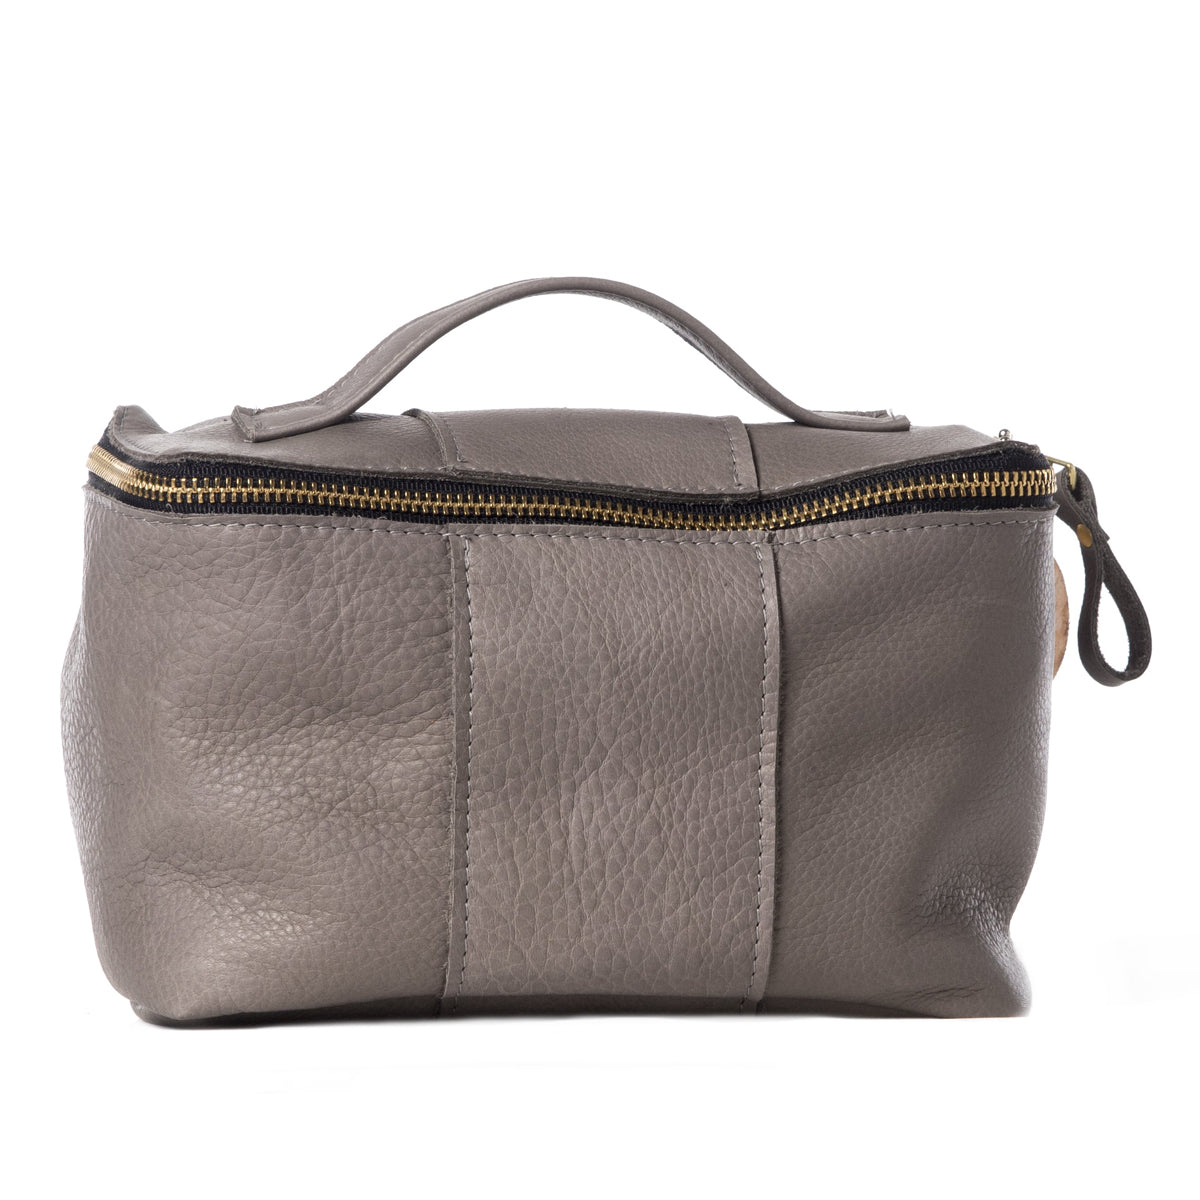 Grey leather carry-all bag handmade in the USA by Vicki Jean. 